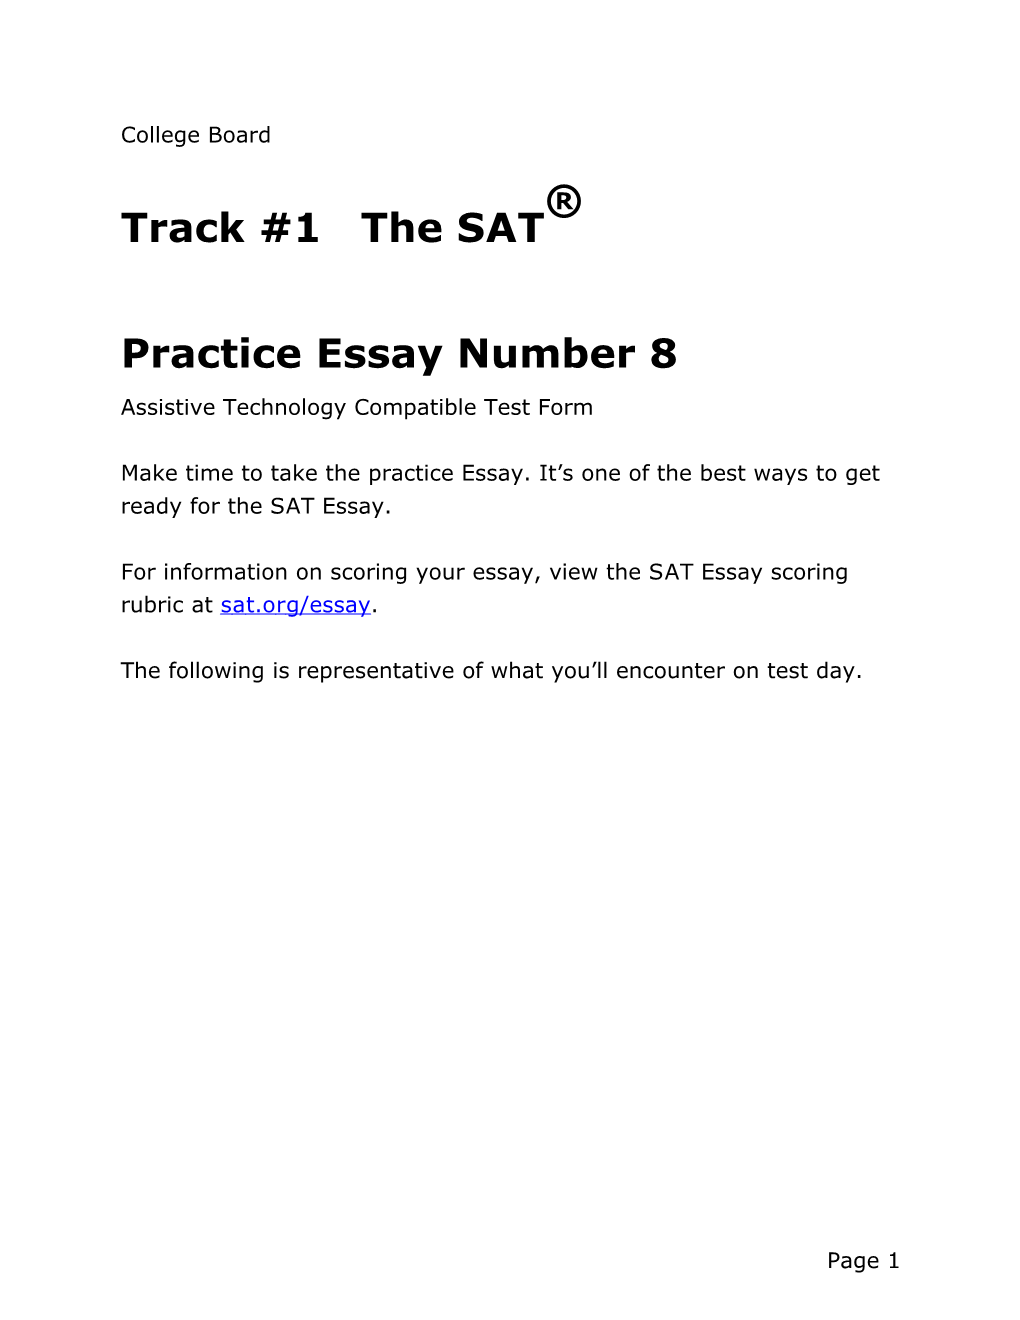 SAT Practice Test 8 Essay for Assistive Technology SAT Suite of Assessments the College Board